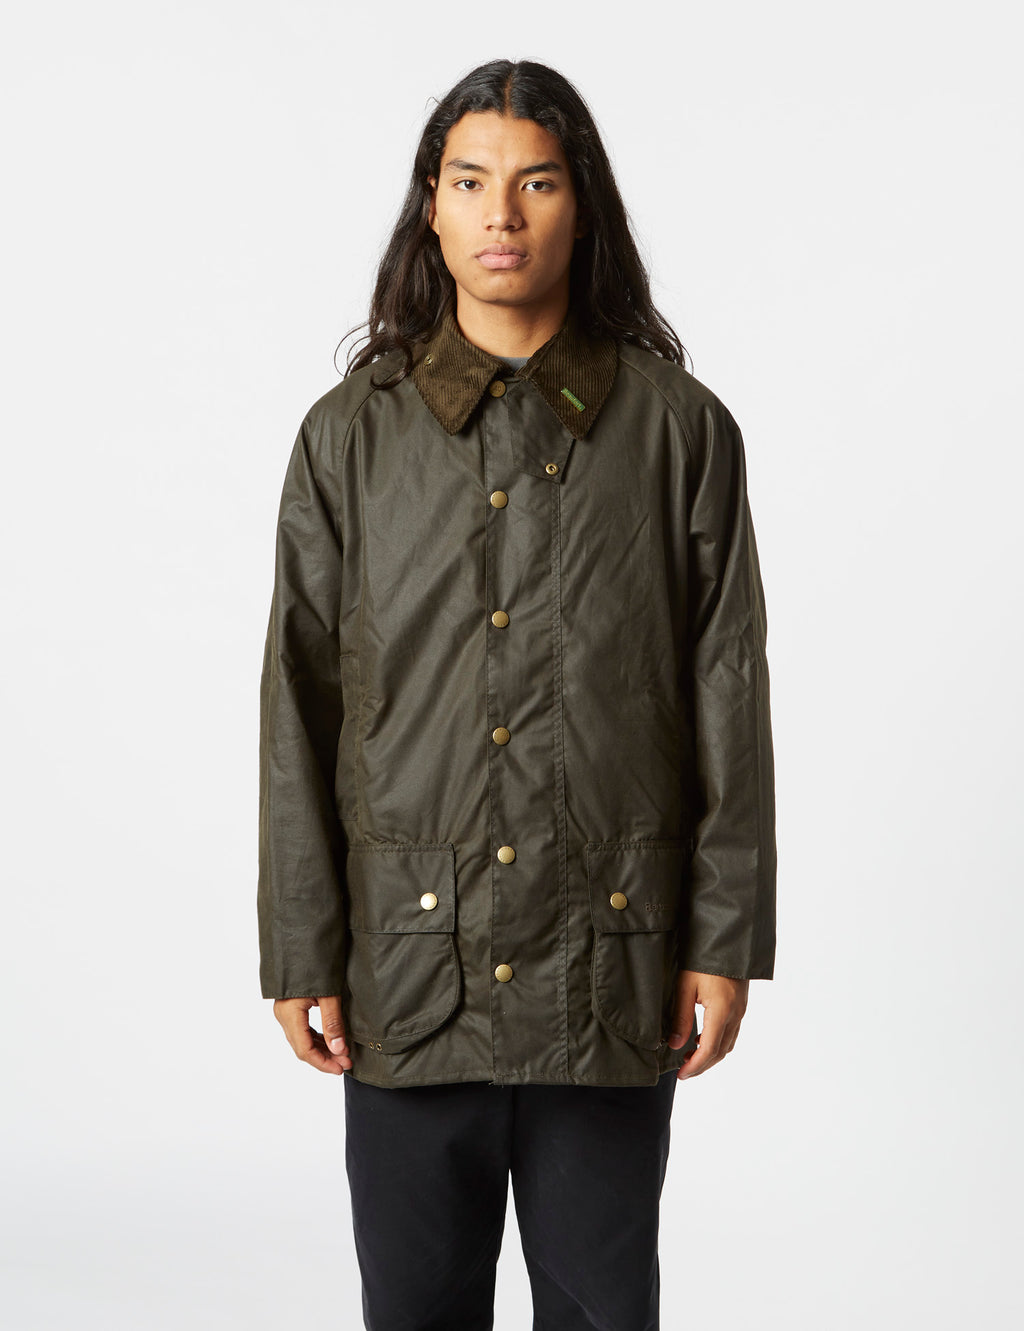 Barbour 40th Anniversary Beaufort Wax Jacket - Olive Green | Article.